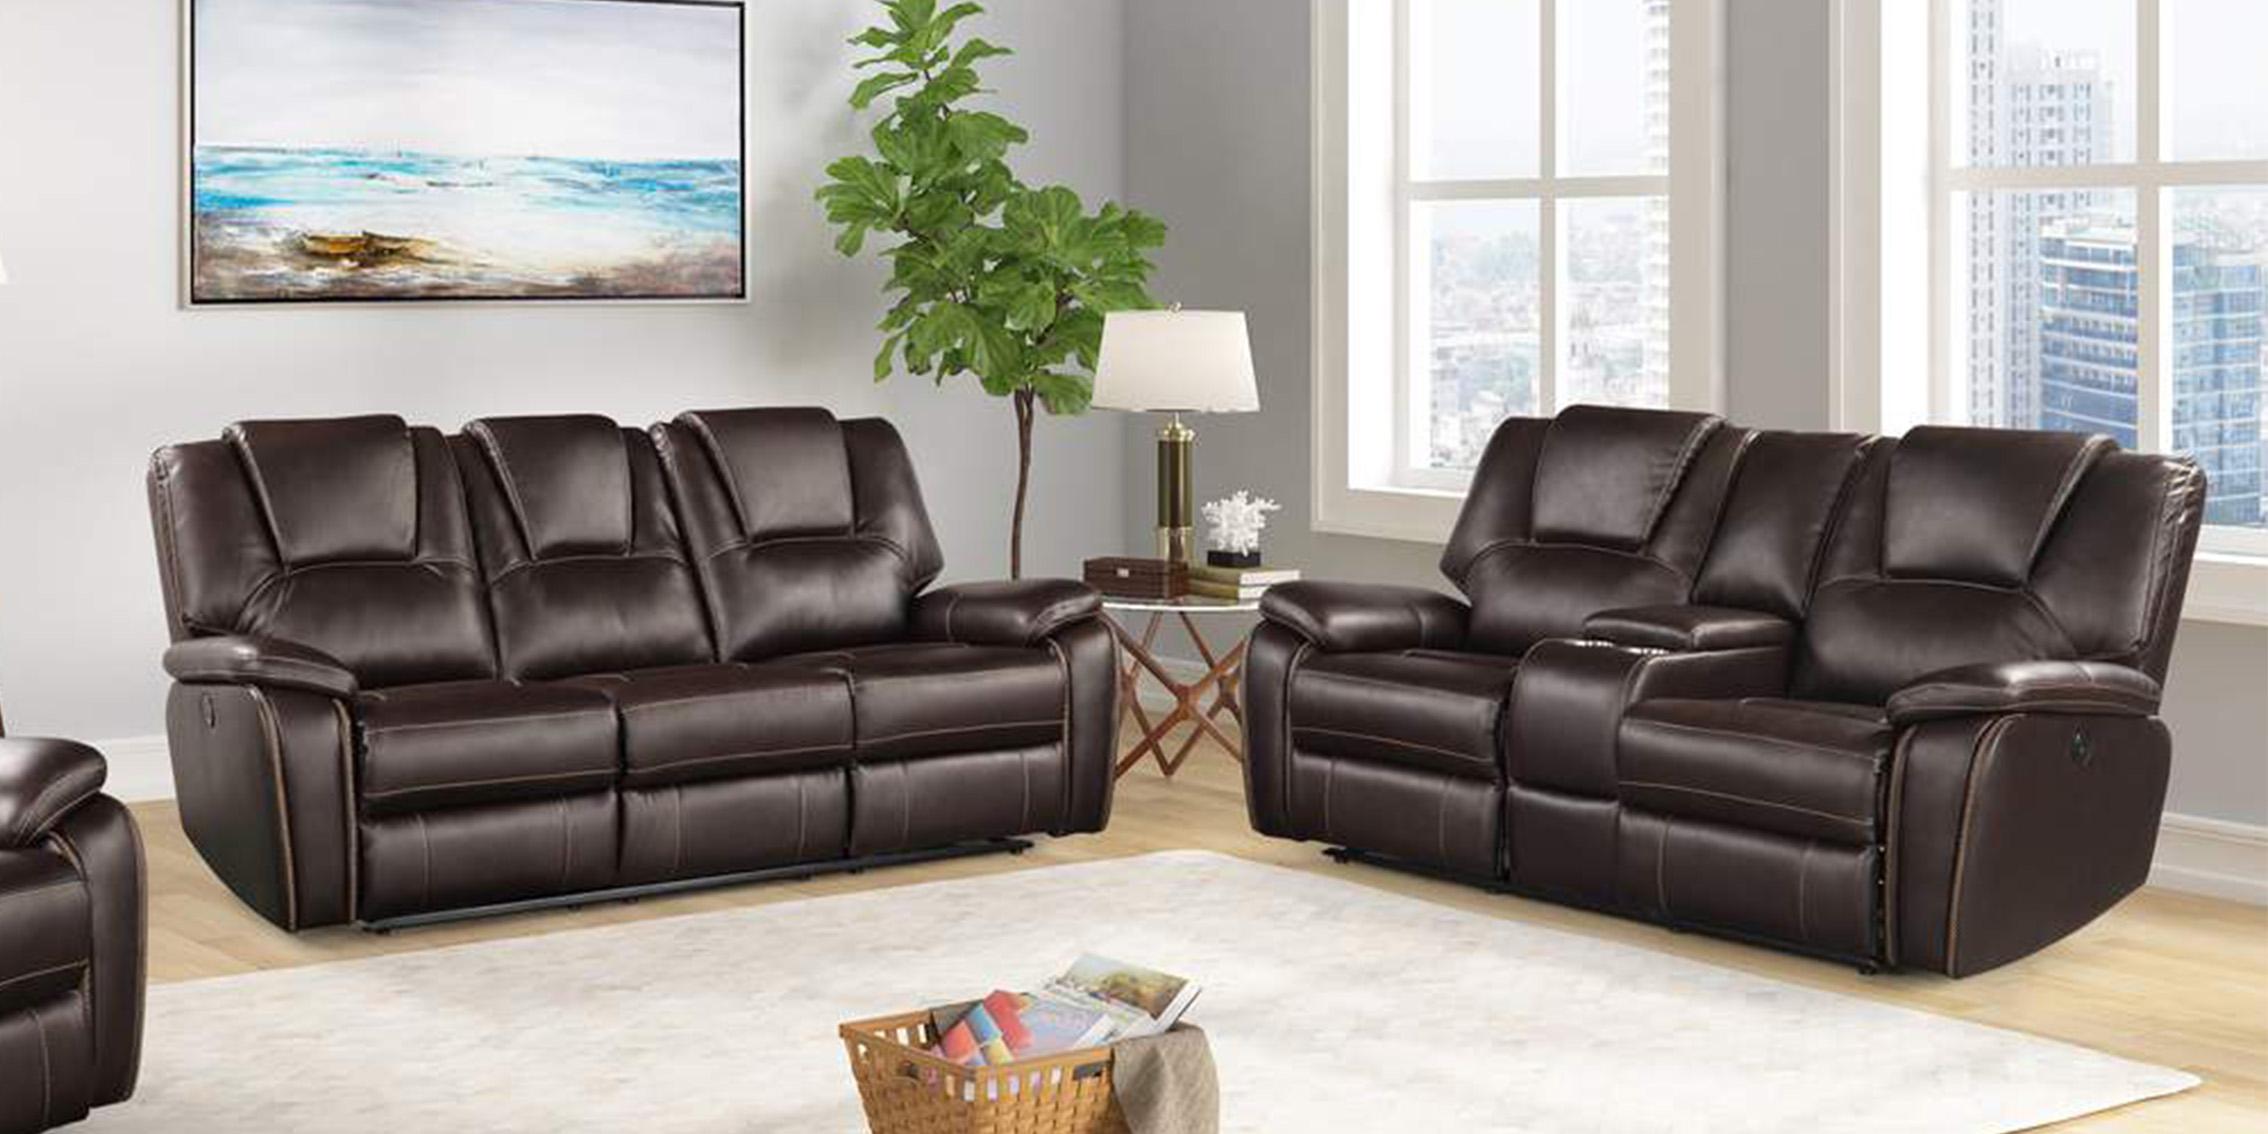 Contemporary, Modern Recliner Sofa Set HONG KONG Brown GHF-733569266852 in Brown Eco Leather